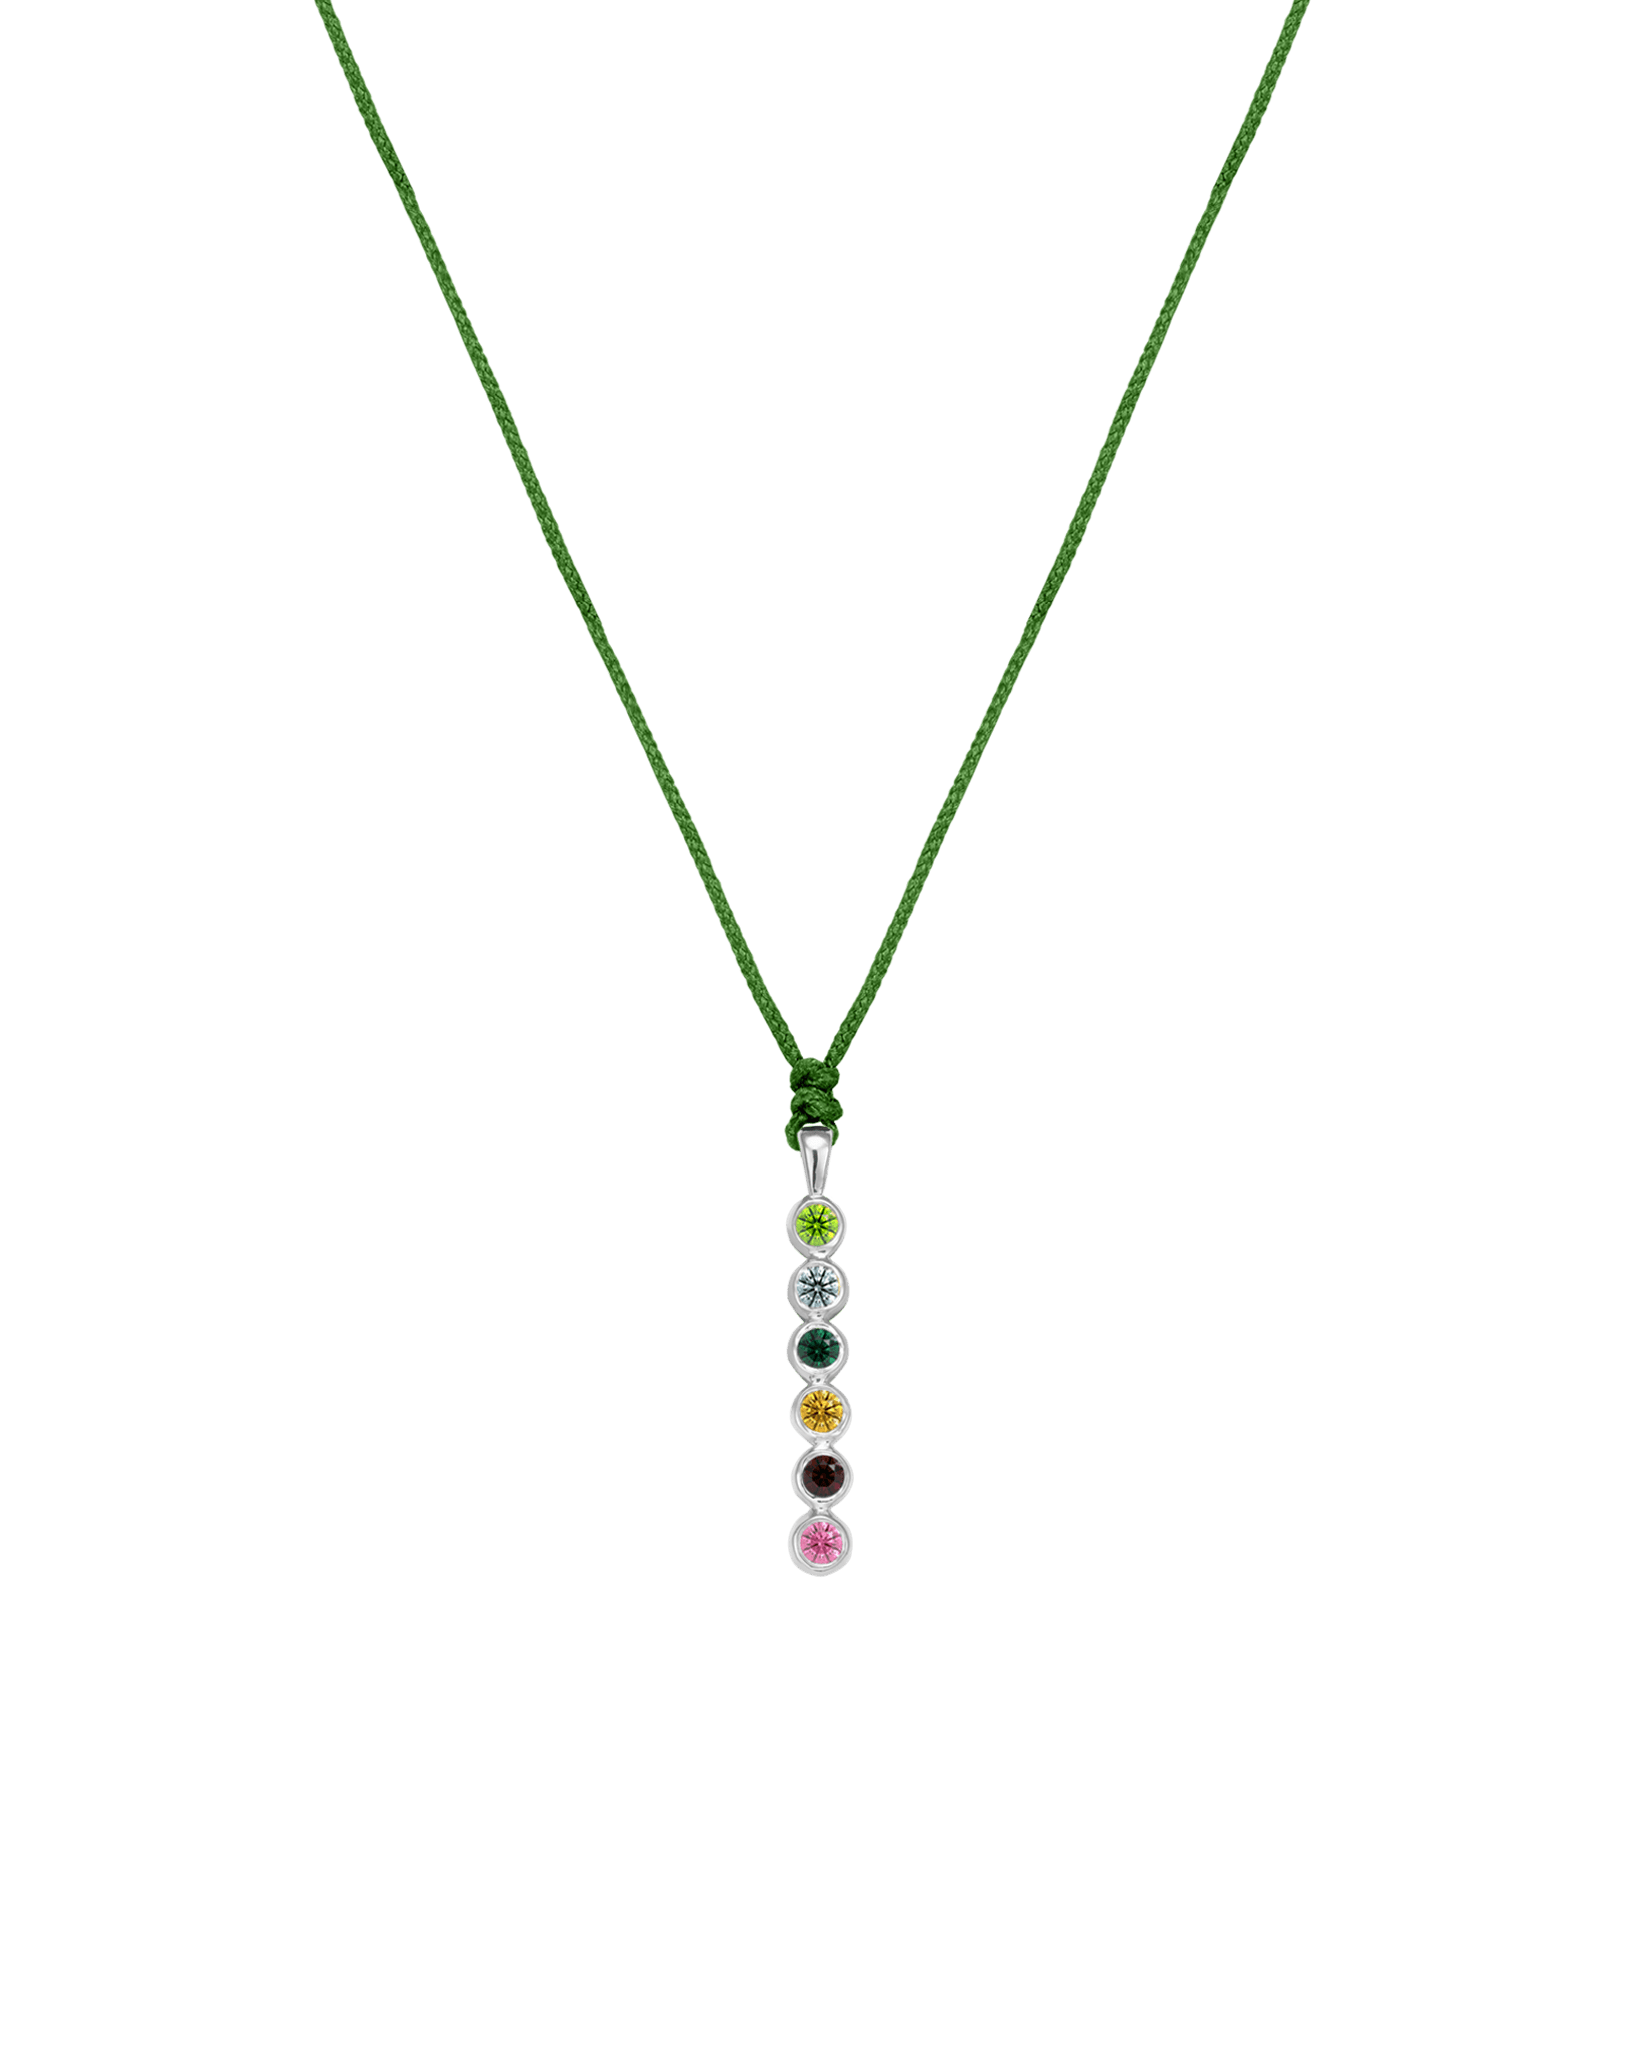 The Birthstones Bar Necklace - 14K White Gold Necklaces 14K Solid Gold Mint 2 